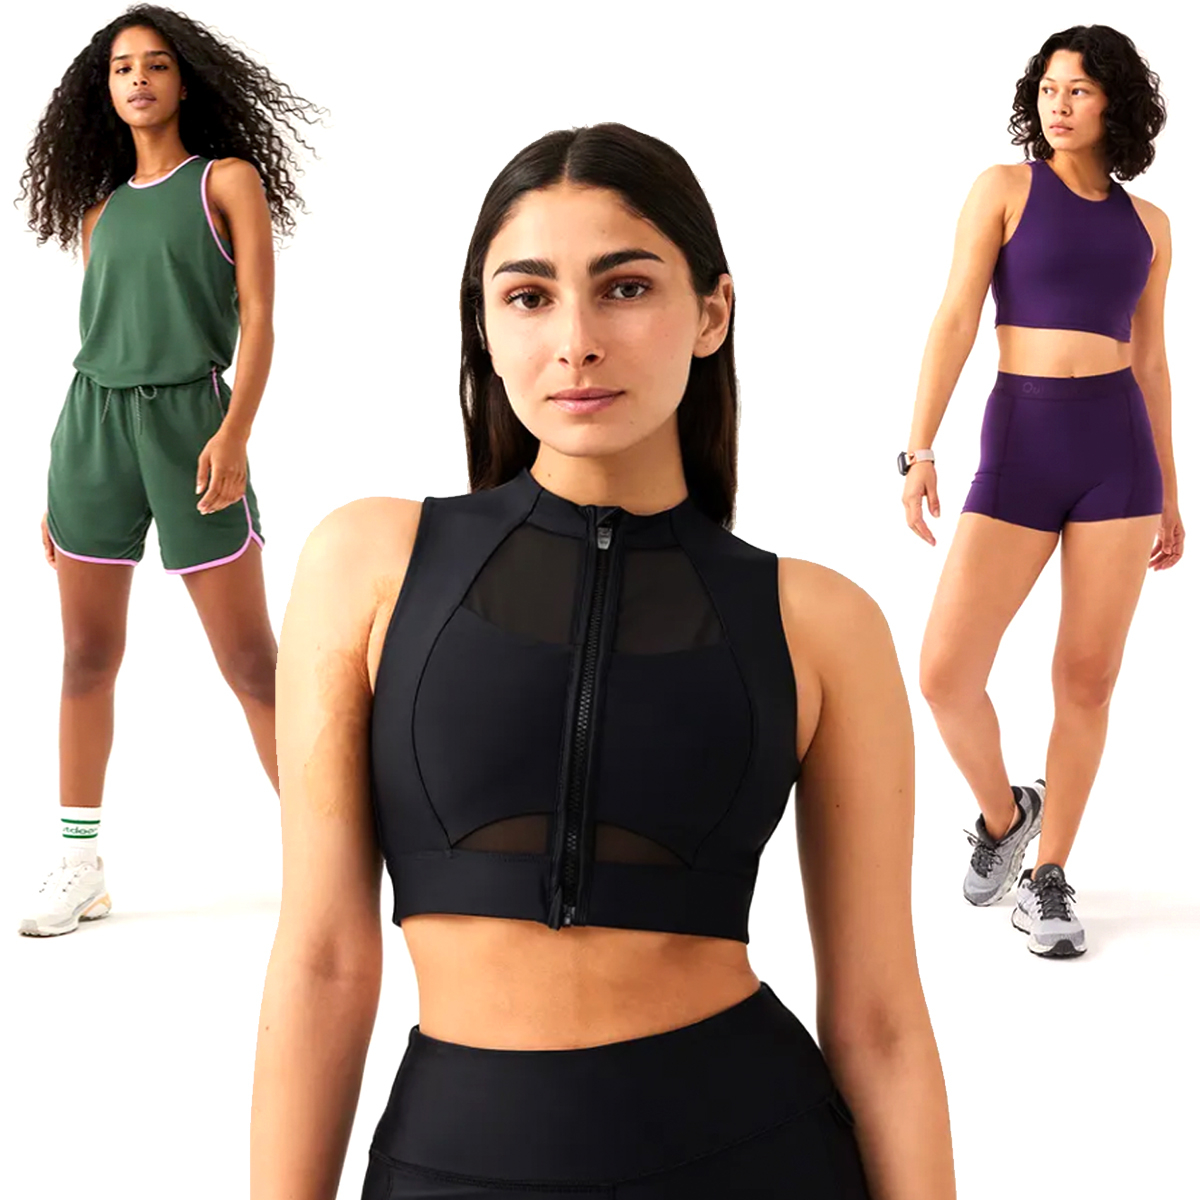 Green Racer Back Sport Bra by Outdoor Voices on Sale